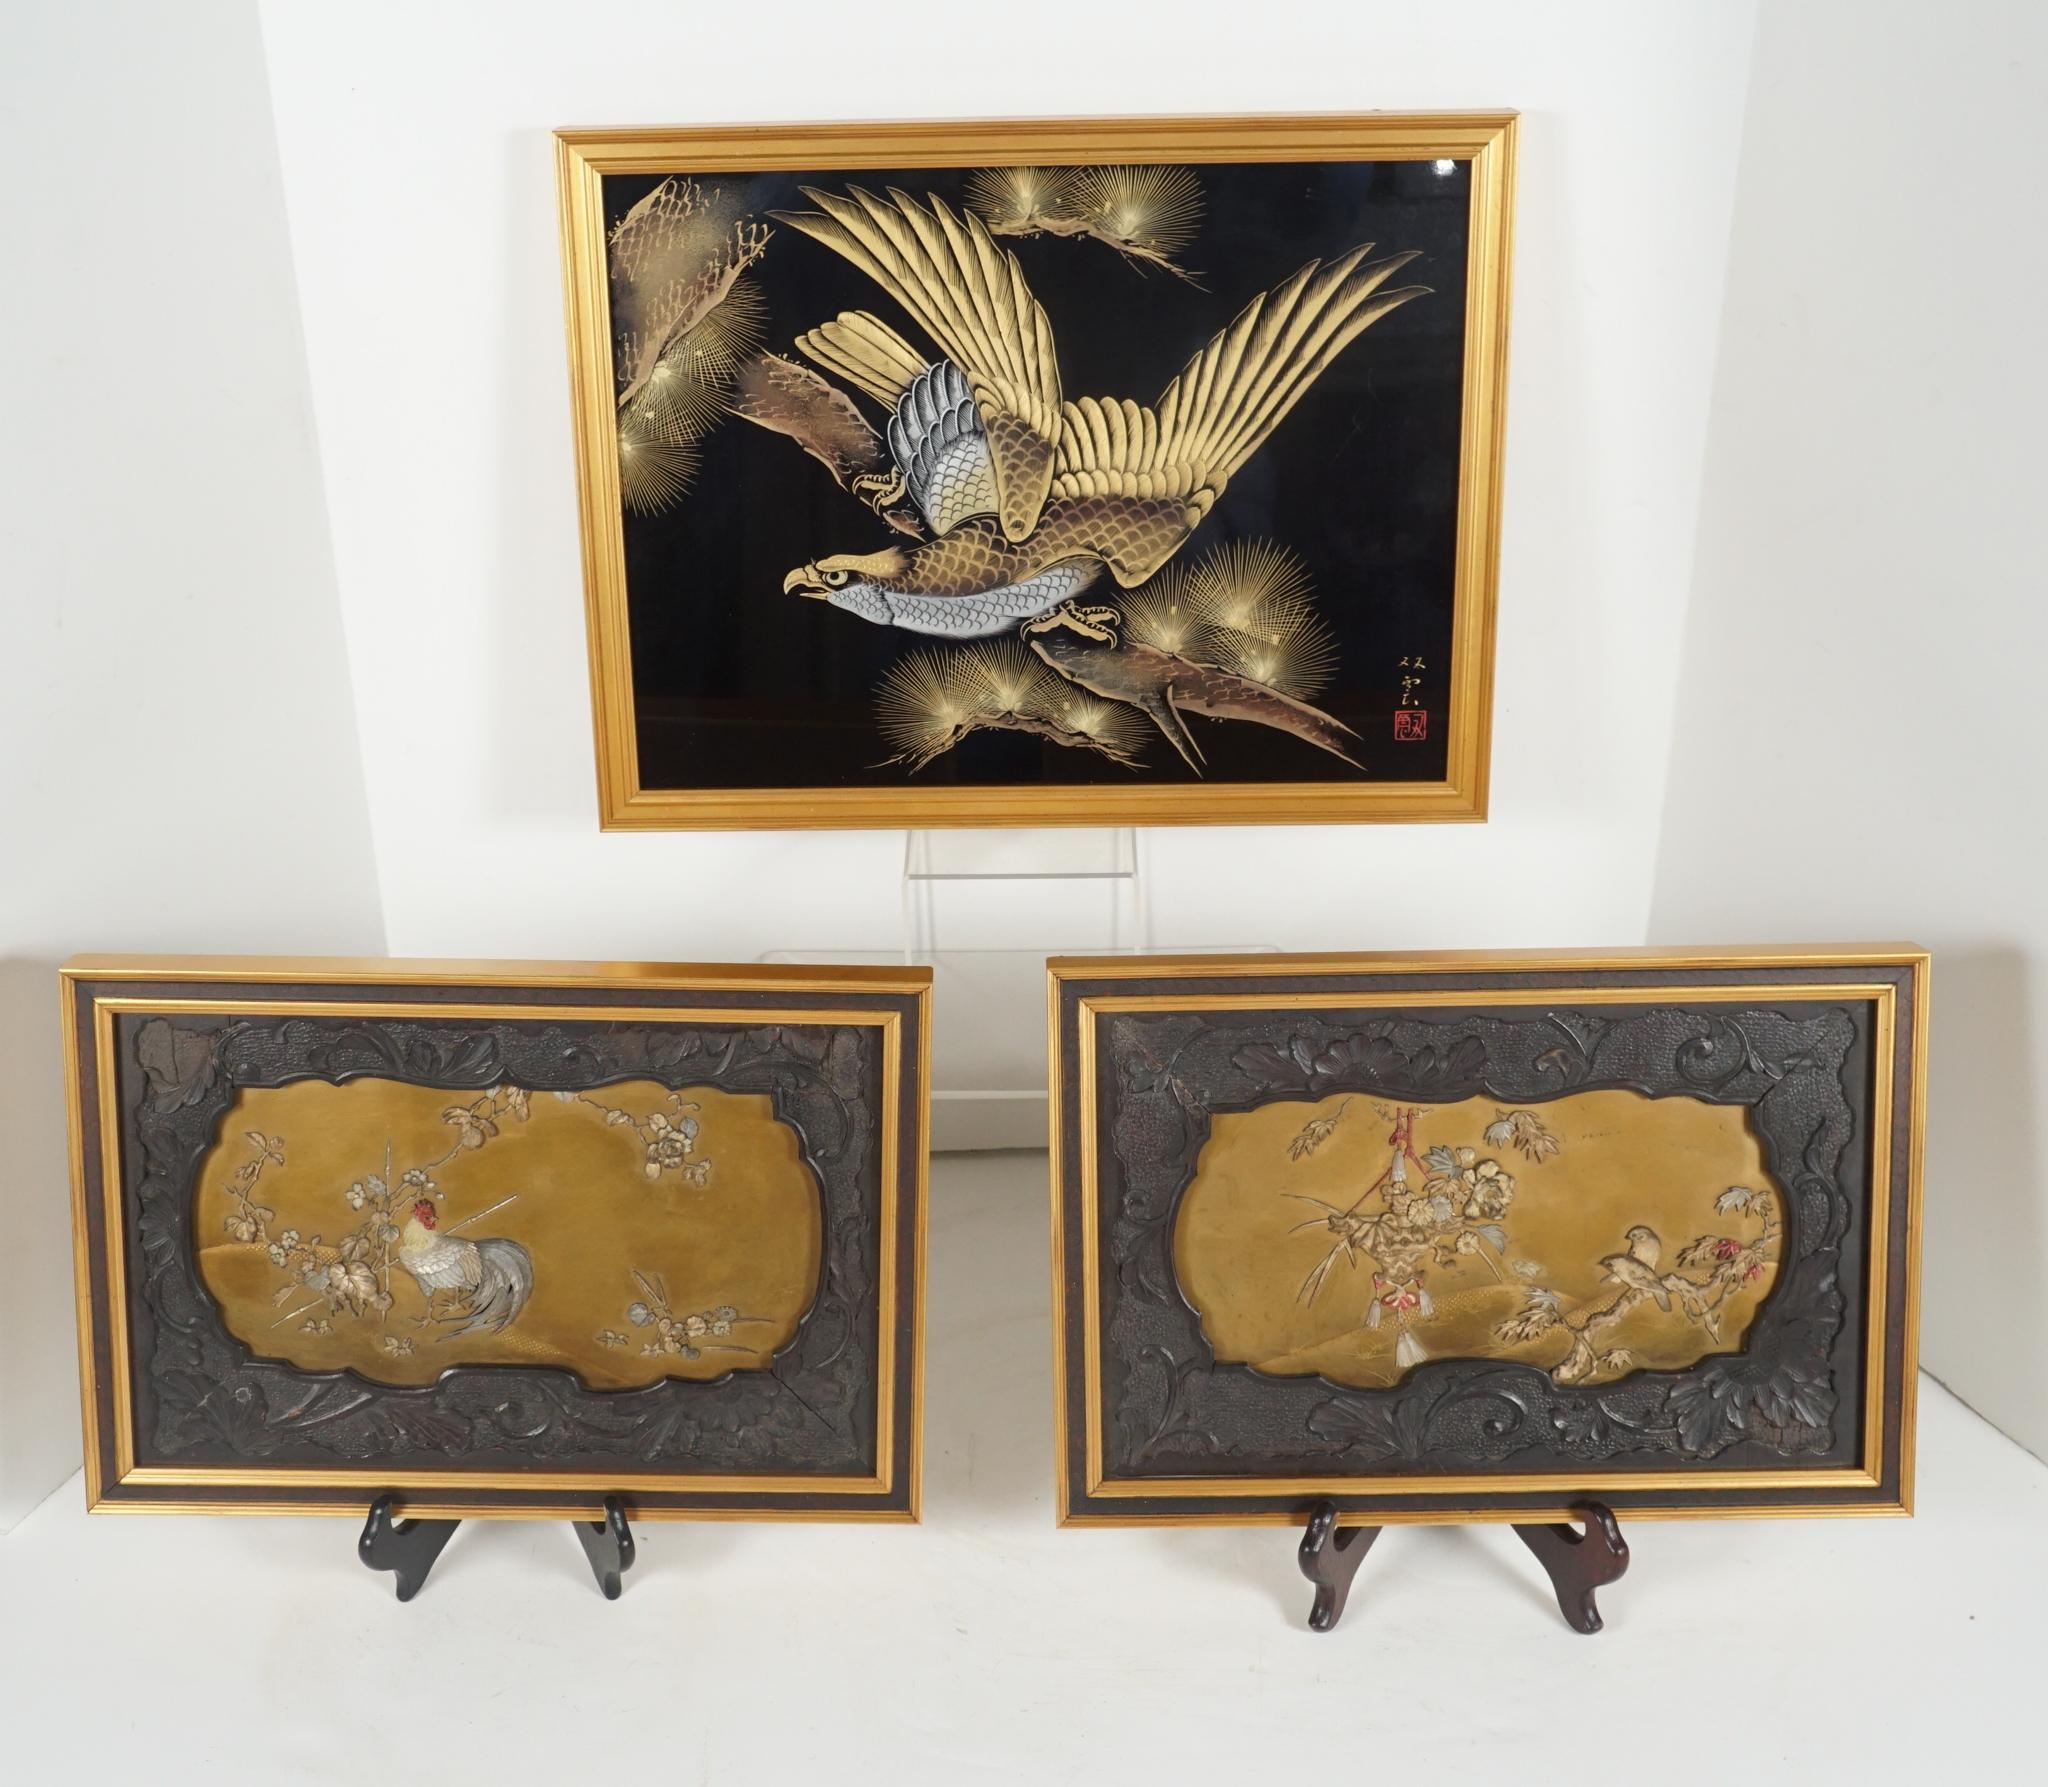 The pair of panels are done in a fine gold lacquer with bone, mother of pearl & abalone shell inlays and where made in the mid 19th century. Most likely from a cabinet and retaining the carved frame surrounds from the cabinet. The gold is rich and